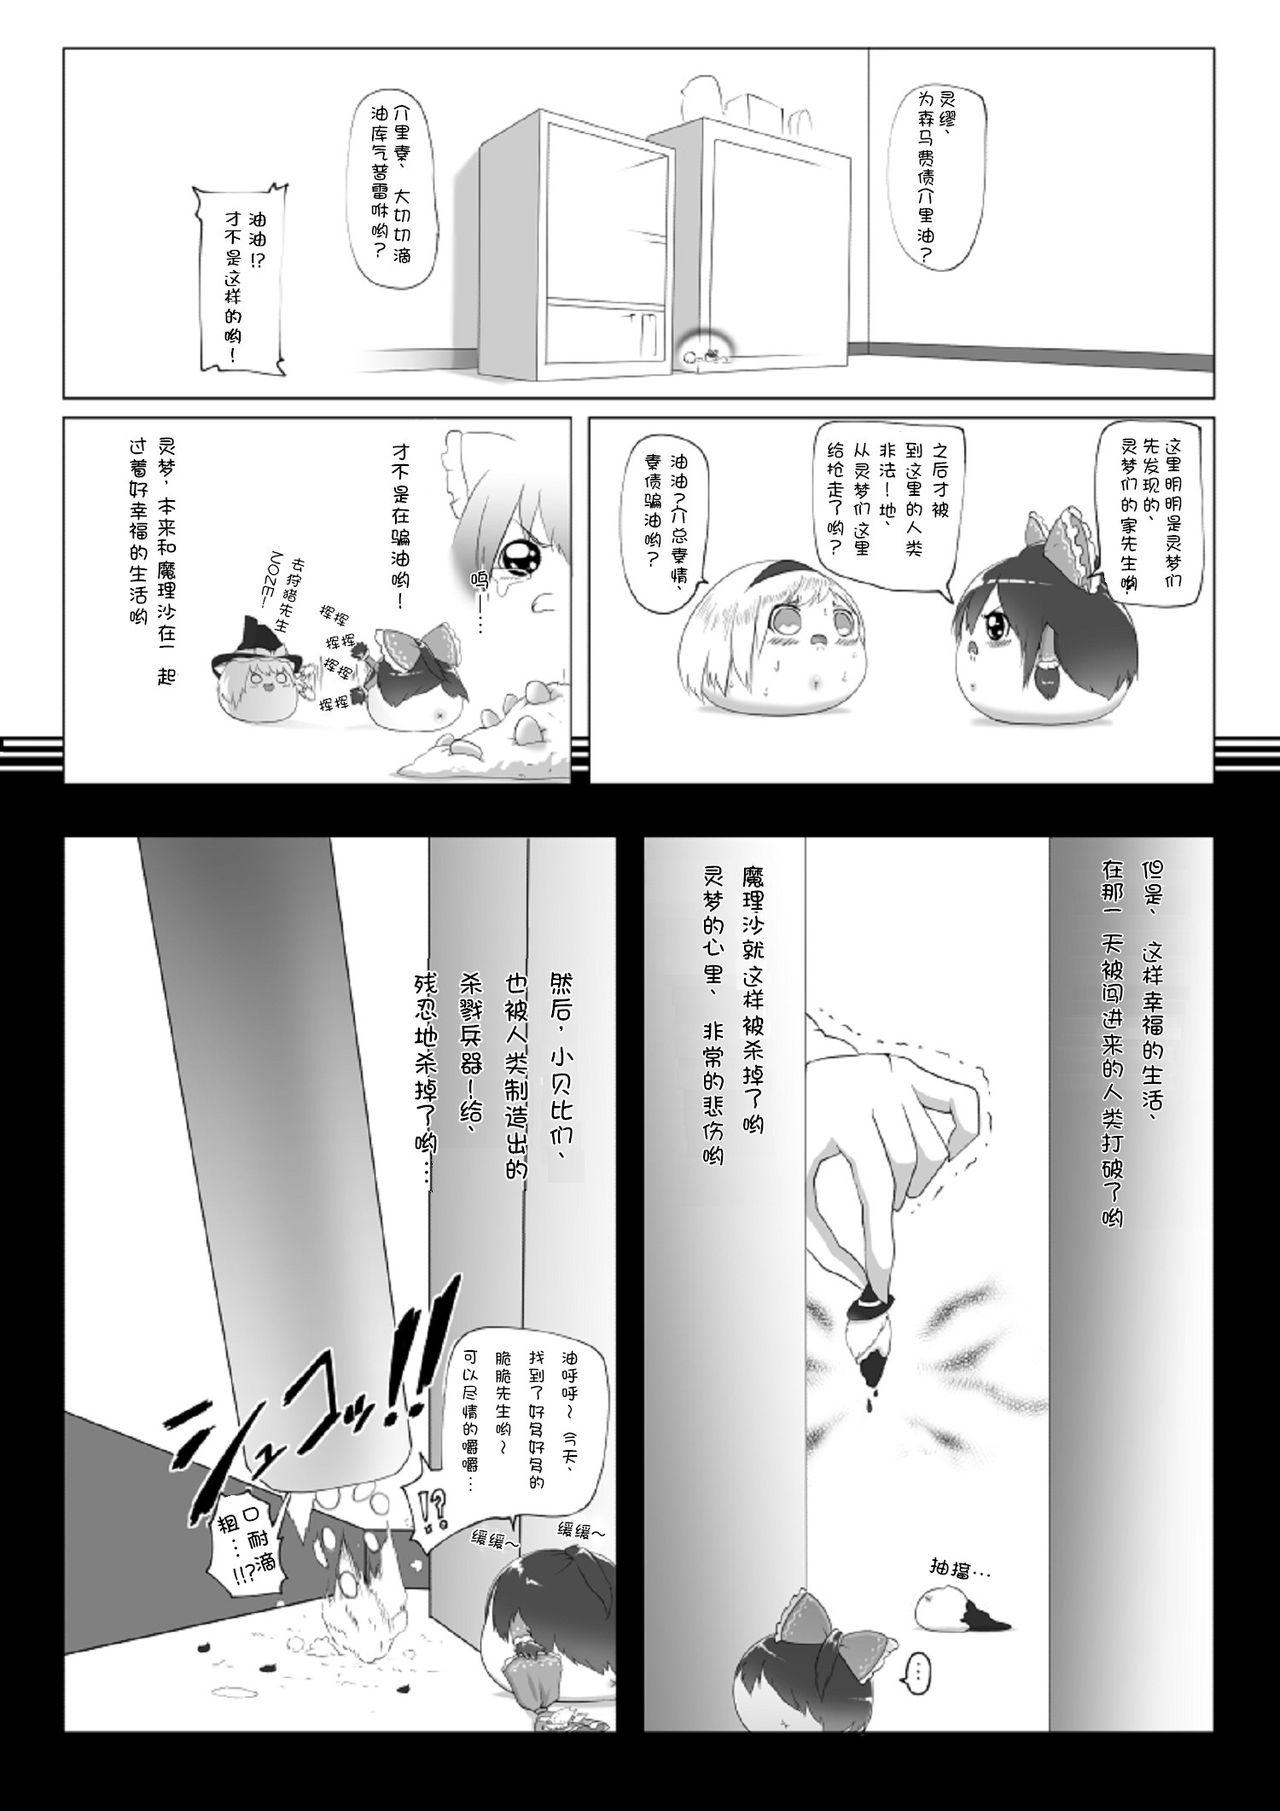 Camshow ゆっくりがかってにはえてくるわけ（Chinese) - Touhou project Amateur Pussy - Page 5